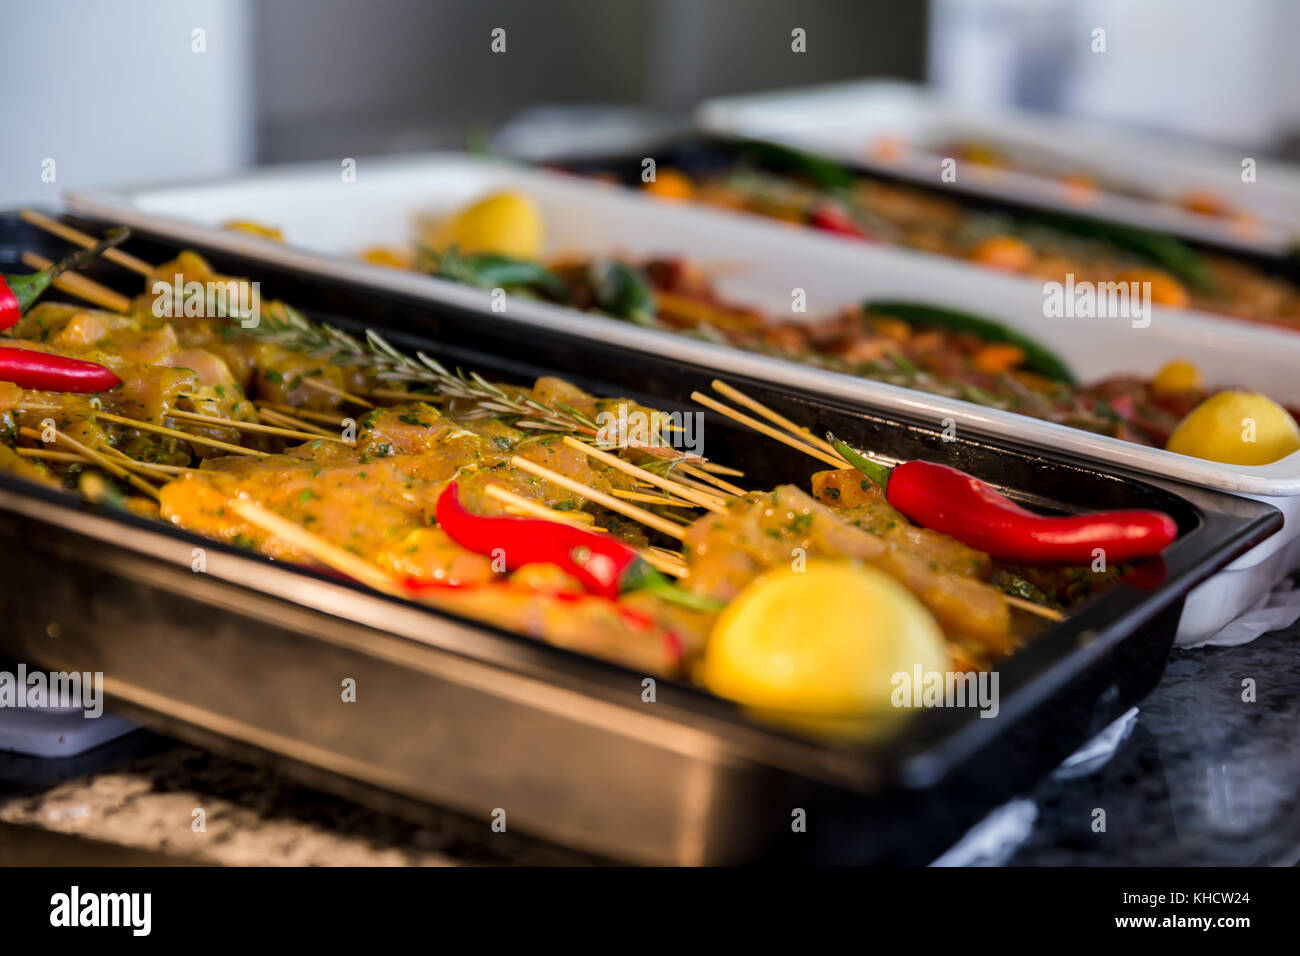 Chicken and turkey in skewers ready for barbecue on a 5 stars hotel buffet Stock Photo